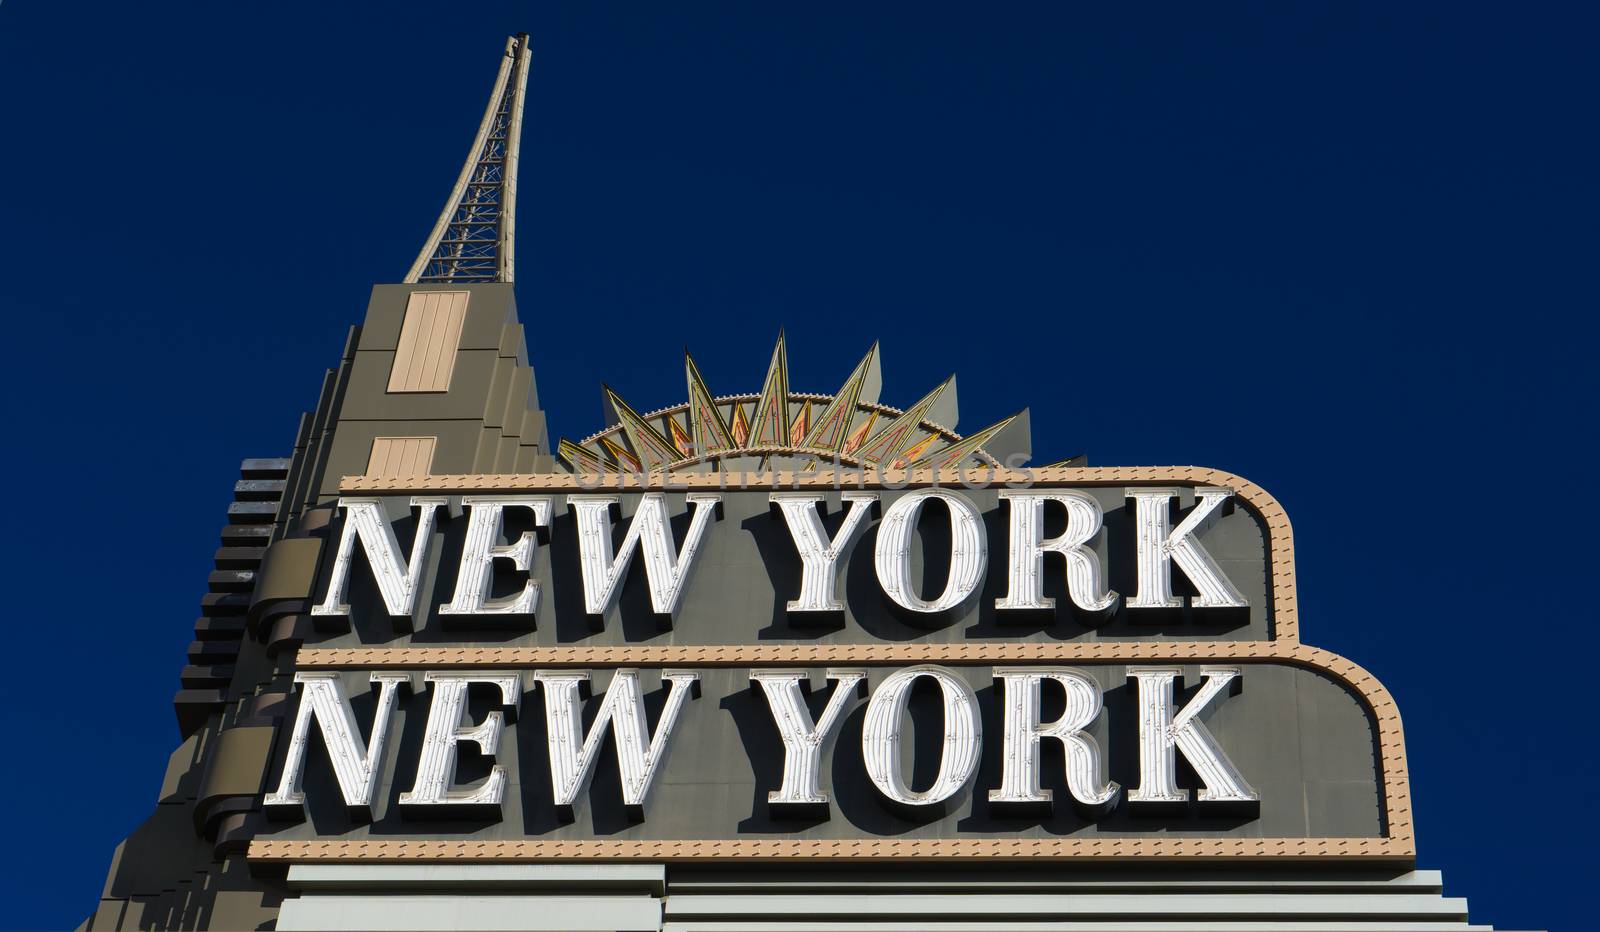 New York-New York Hotel and Casino by wolterk